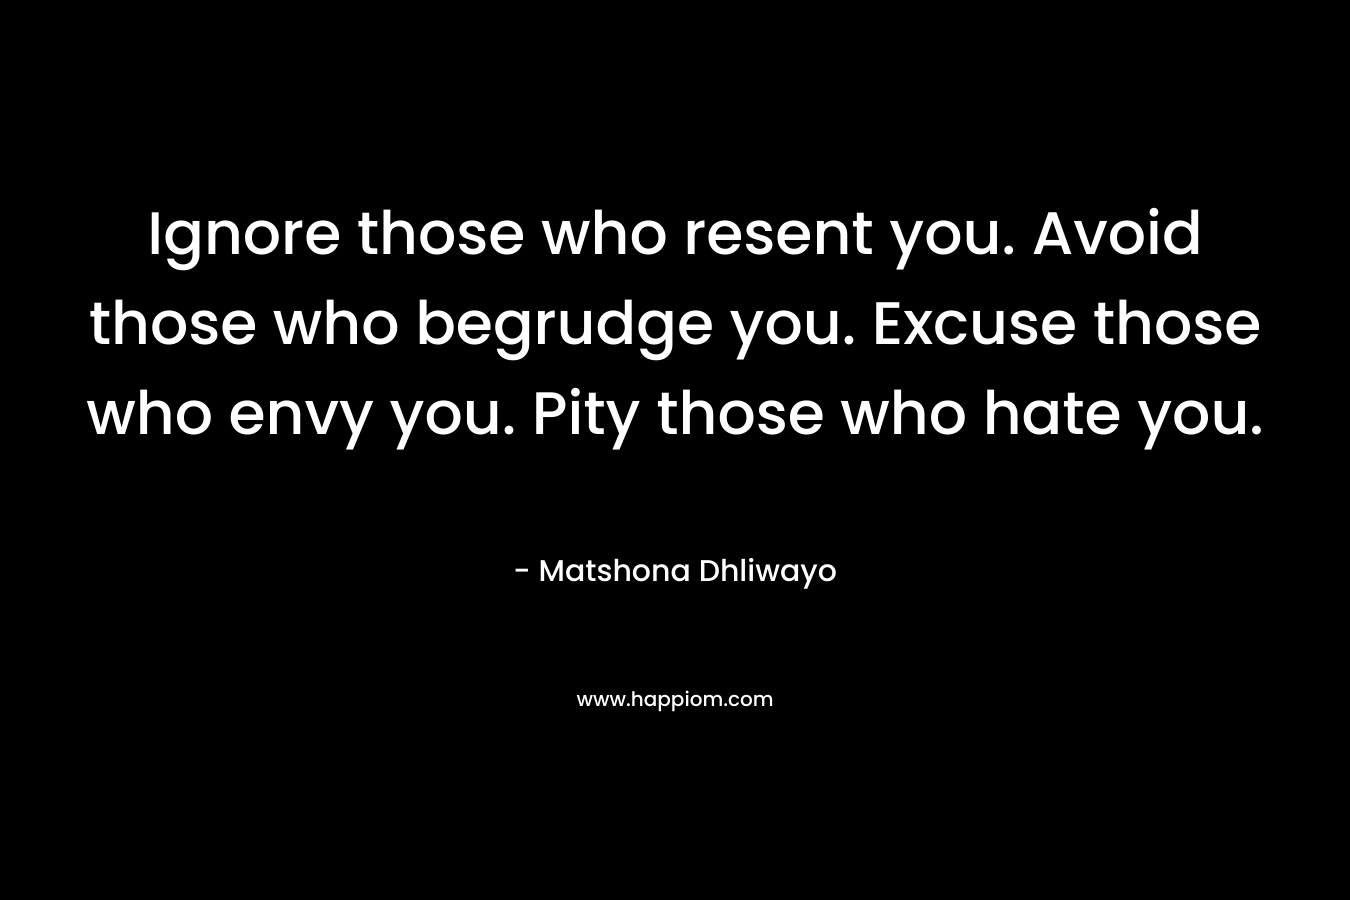 Ignore those who resent you. Avoid those who begrudge you. Excuse those who envy you. Pity those who hate you. – Matshona Dhliwayo